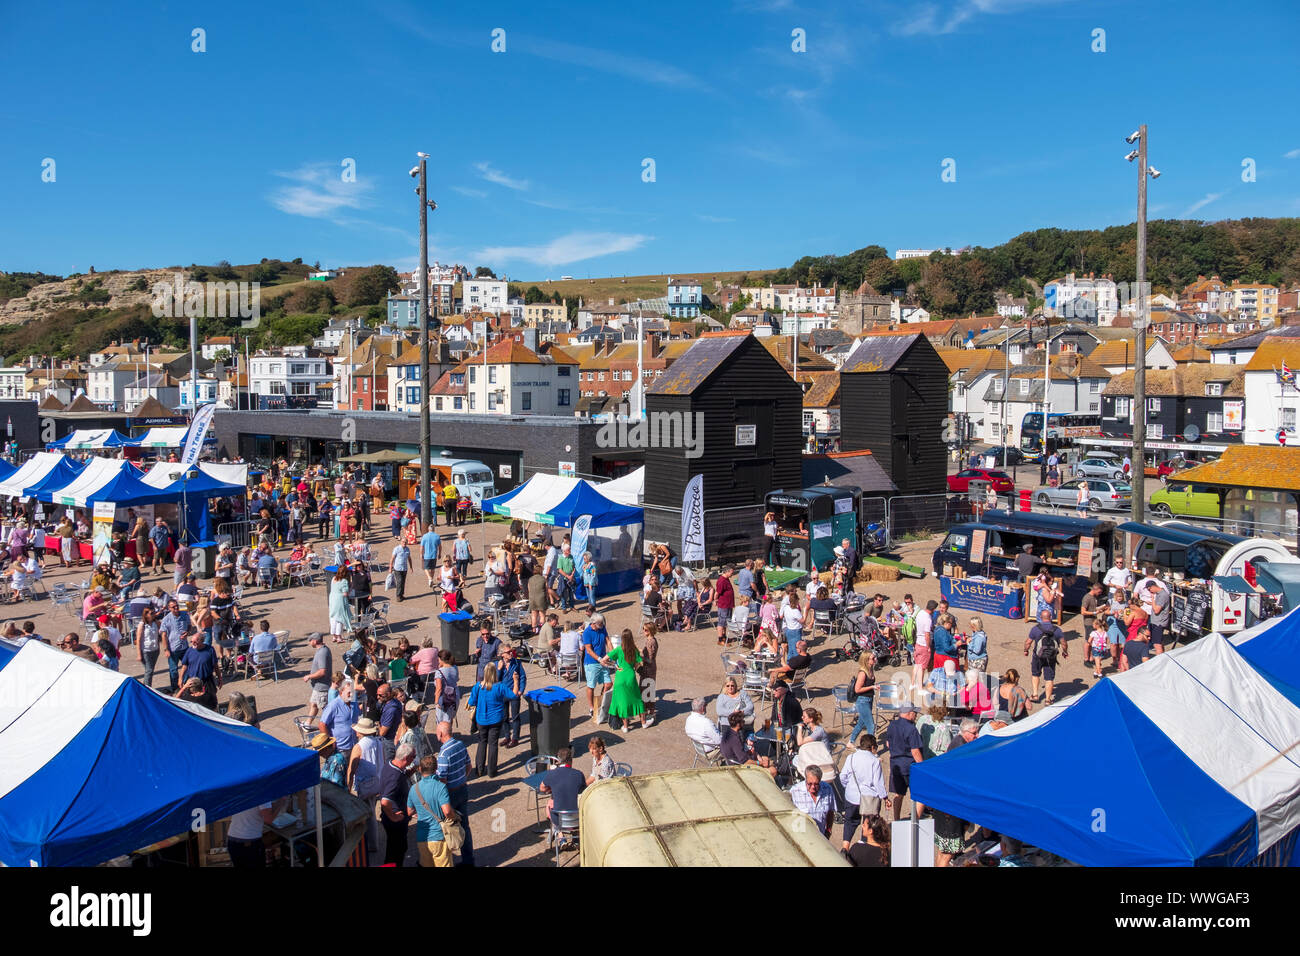 Hastings Annual Seafood Festival 2019, am Old Town Stade Seafood Festival in Rock-a-Nore, East Sussex, Großbritannien Stockfoto